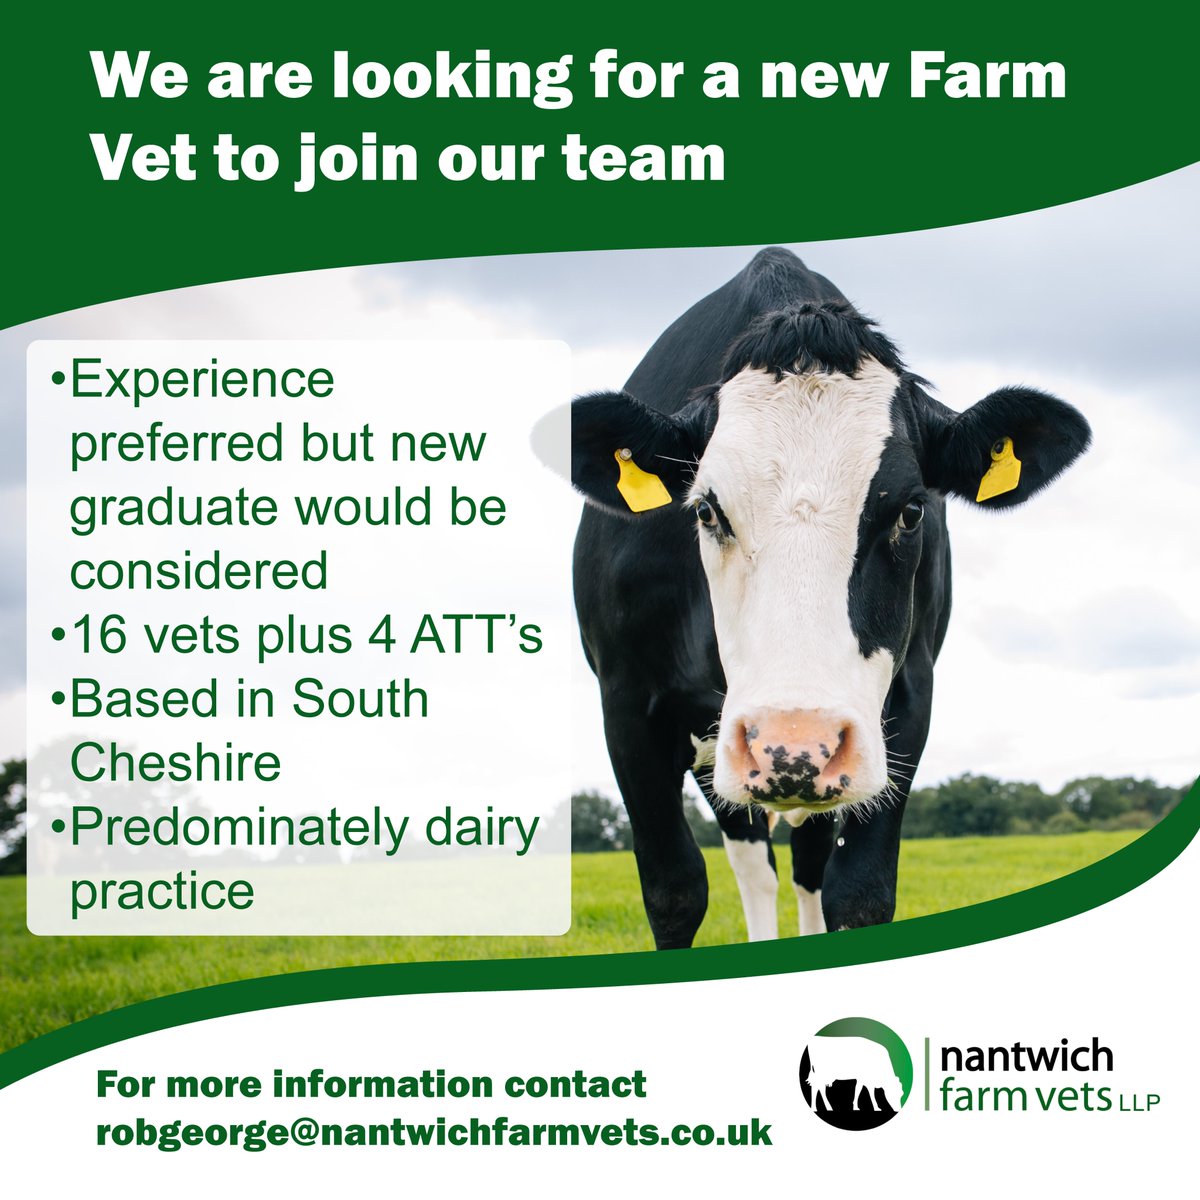 We are looking for a new vet to join the Nantwich Farm Vets team. Visit our website to read the full job description and to see details of the Approved Tuberculin tester/ Vet Tech role we are also recruiting for. nantwichfarmvets.co.uk/vacancies